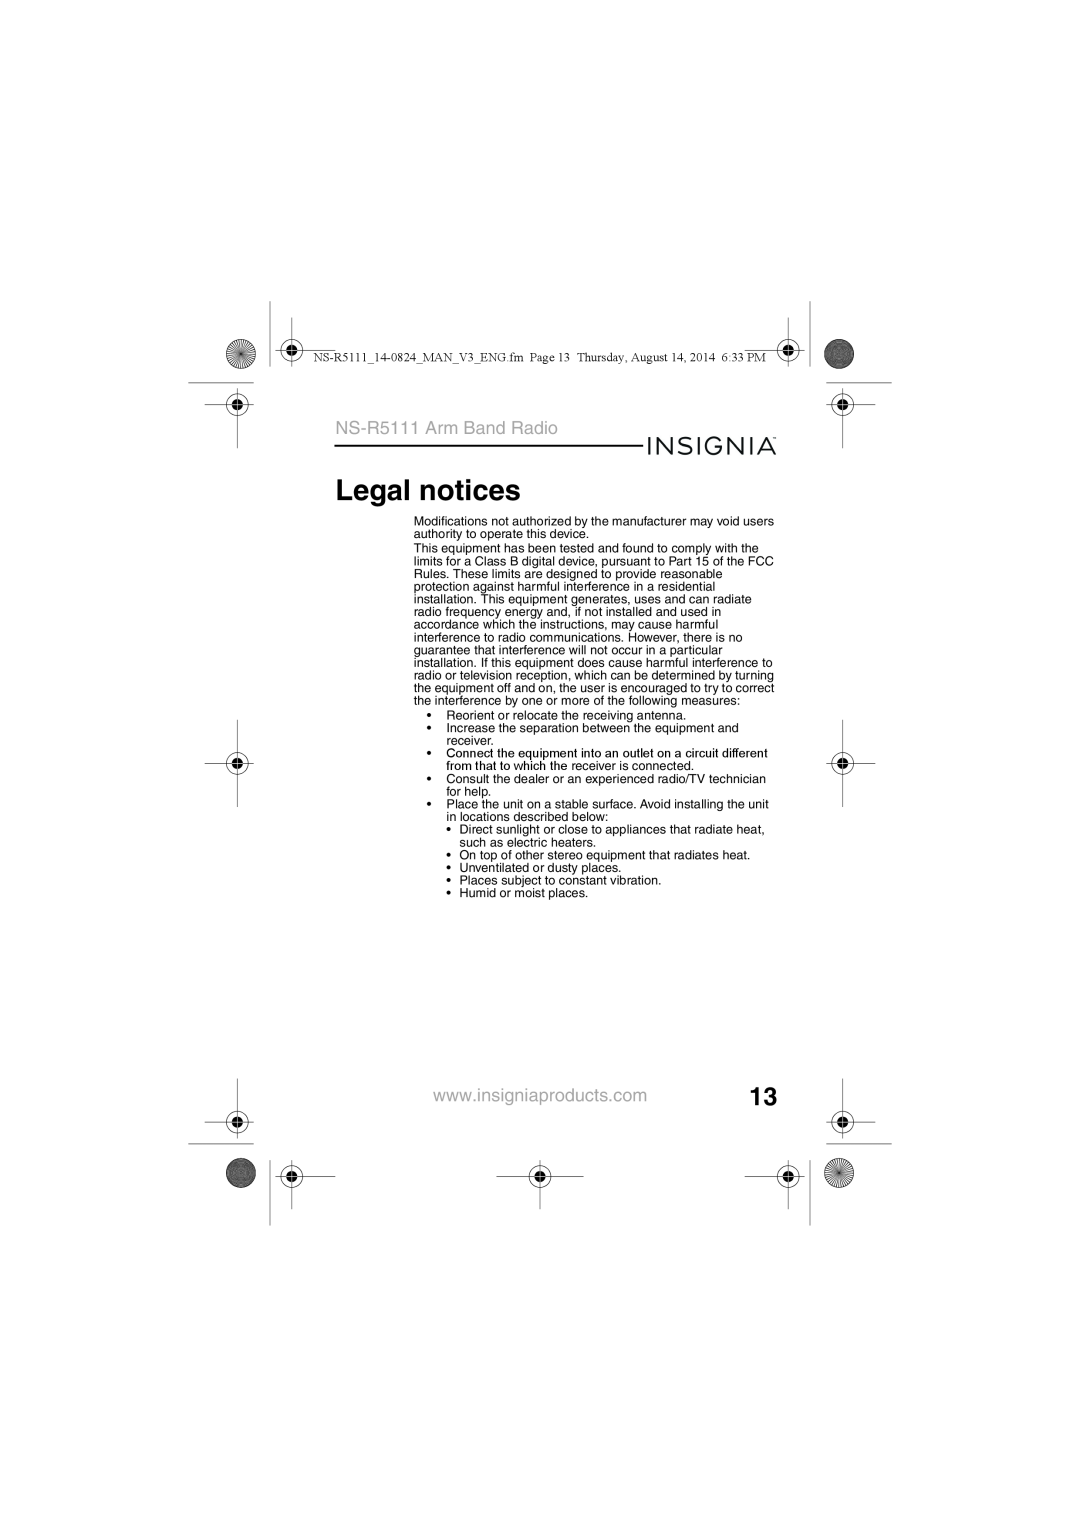 Insignia manual Legal notices, NS-R5111Arm Band Radio 